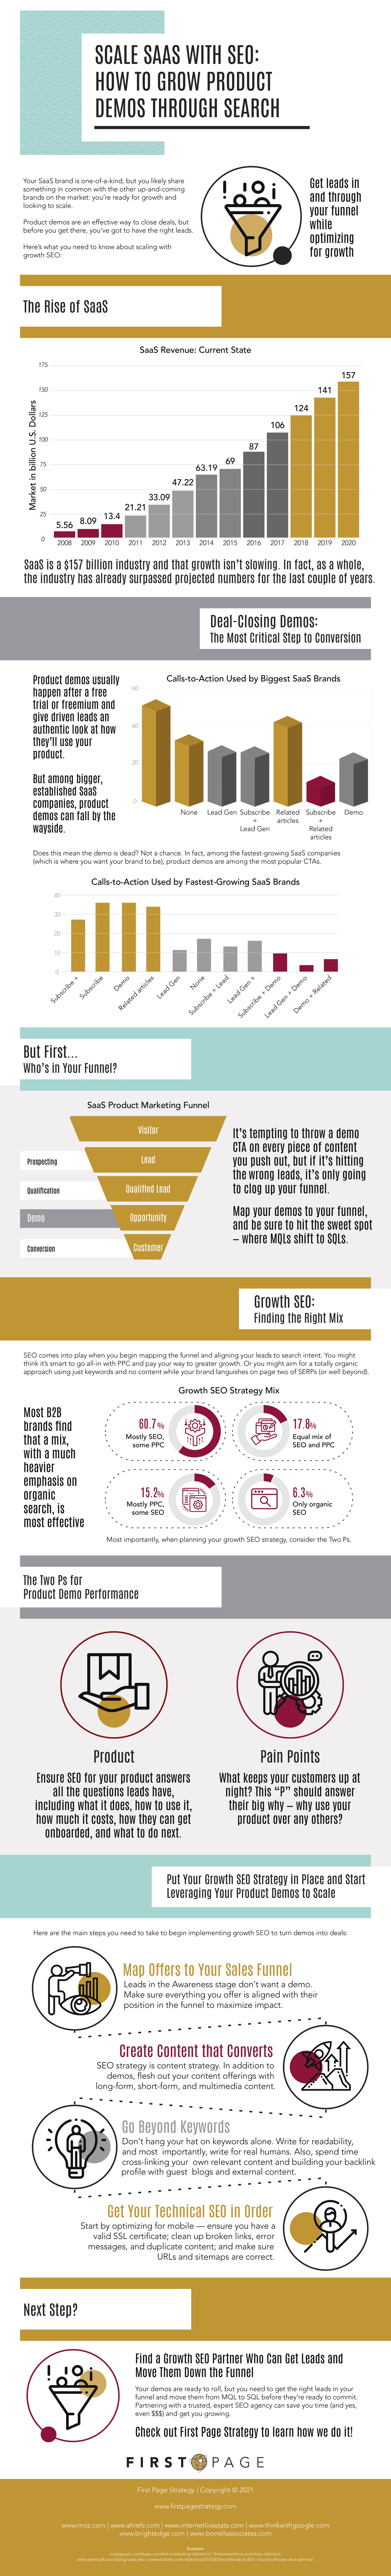 infographic about How to Use Growth SEO to Grow Product Demos for Your SaaS Platform